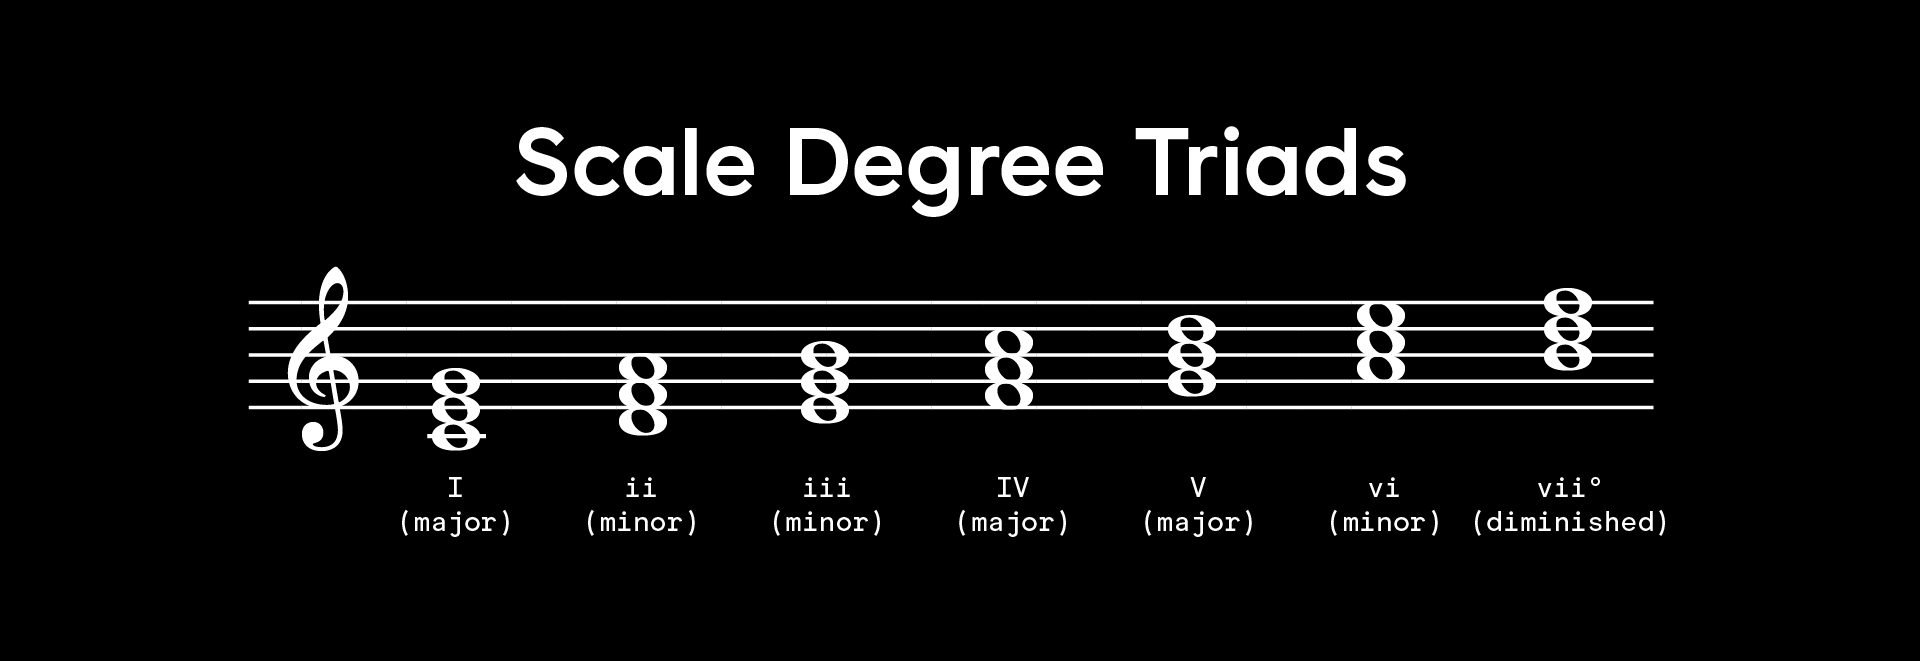 The chord qualities of each scale degree, using the C major scale as an example